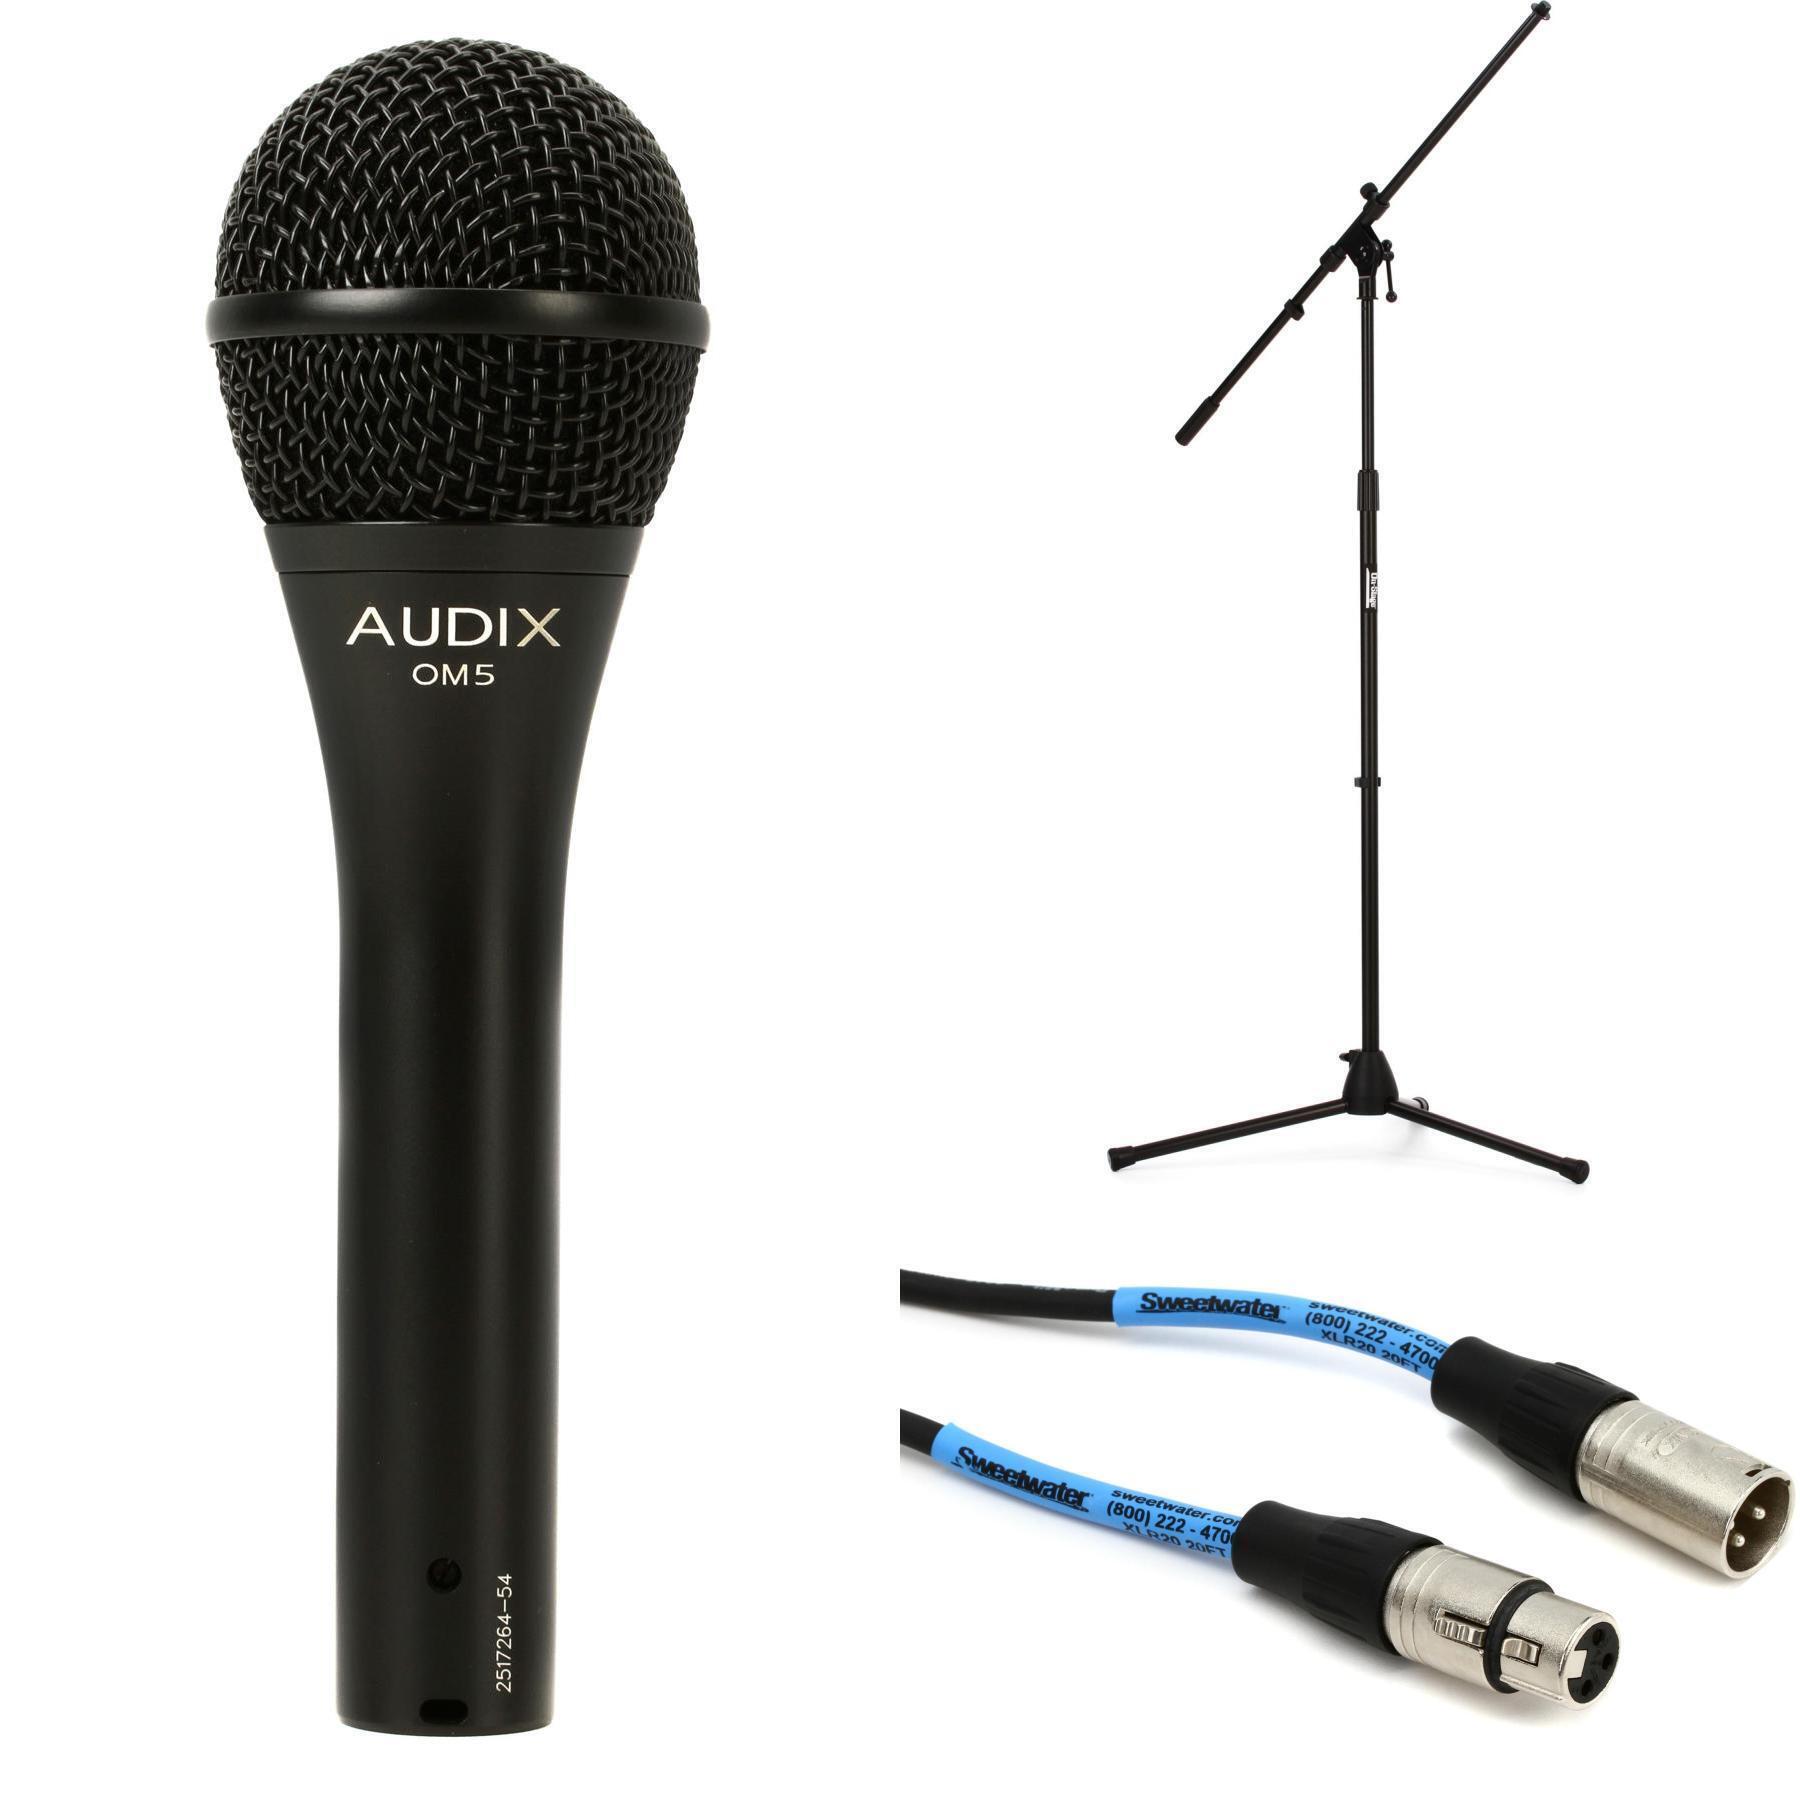 Audix OM5 Hypercardioid Dynamic Vocal Microphone | Sweetwater